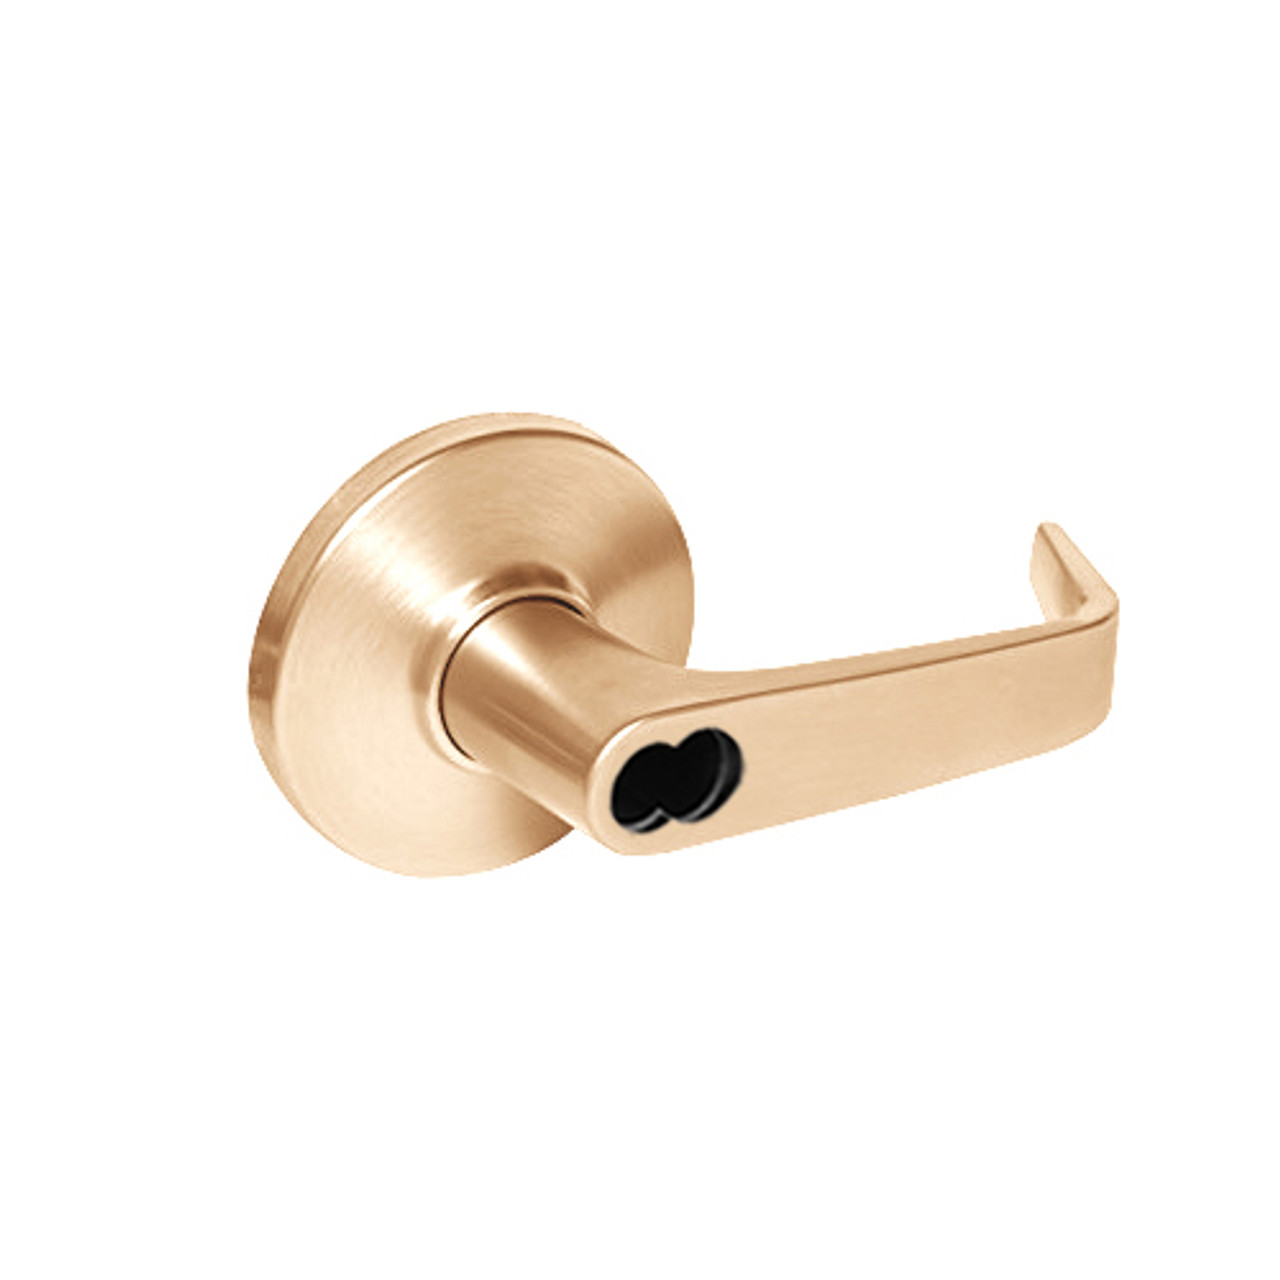 9K47W15DSTK611 Best 9K Series Institutional Cylindrical Lever Locks with Contour Angle with Return Lever Design Accept 7 Pin Best Core in Bright Bronze